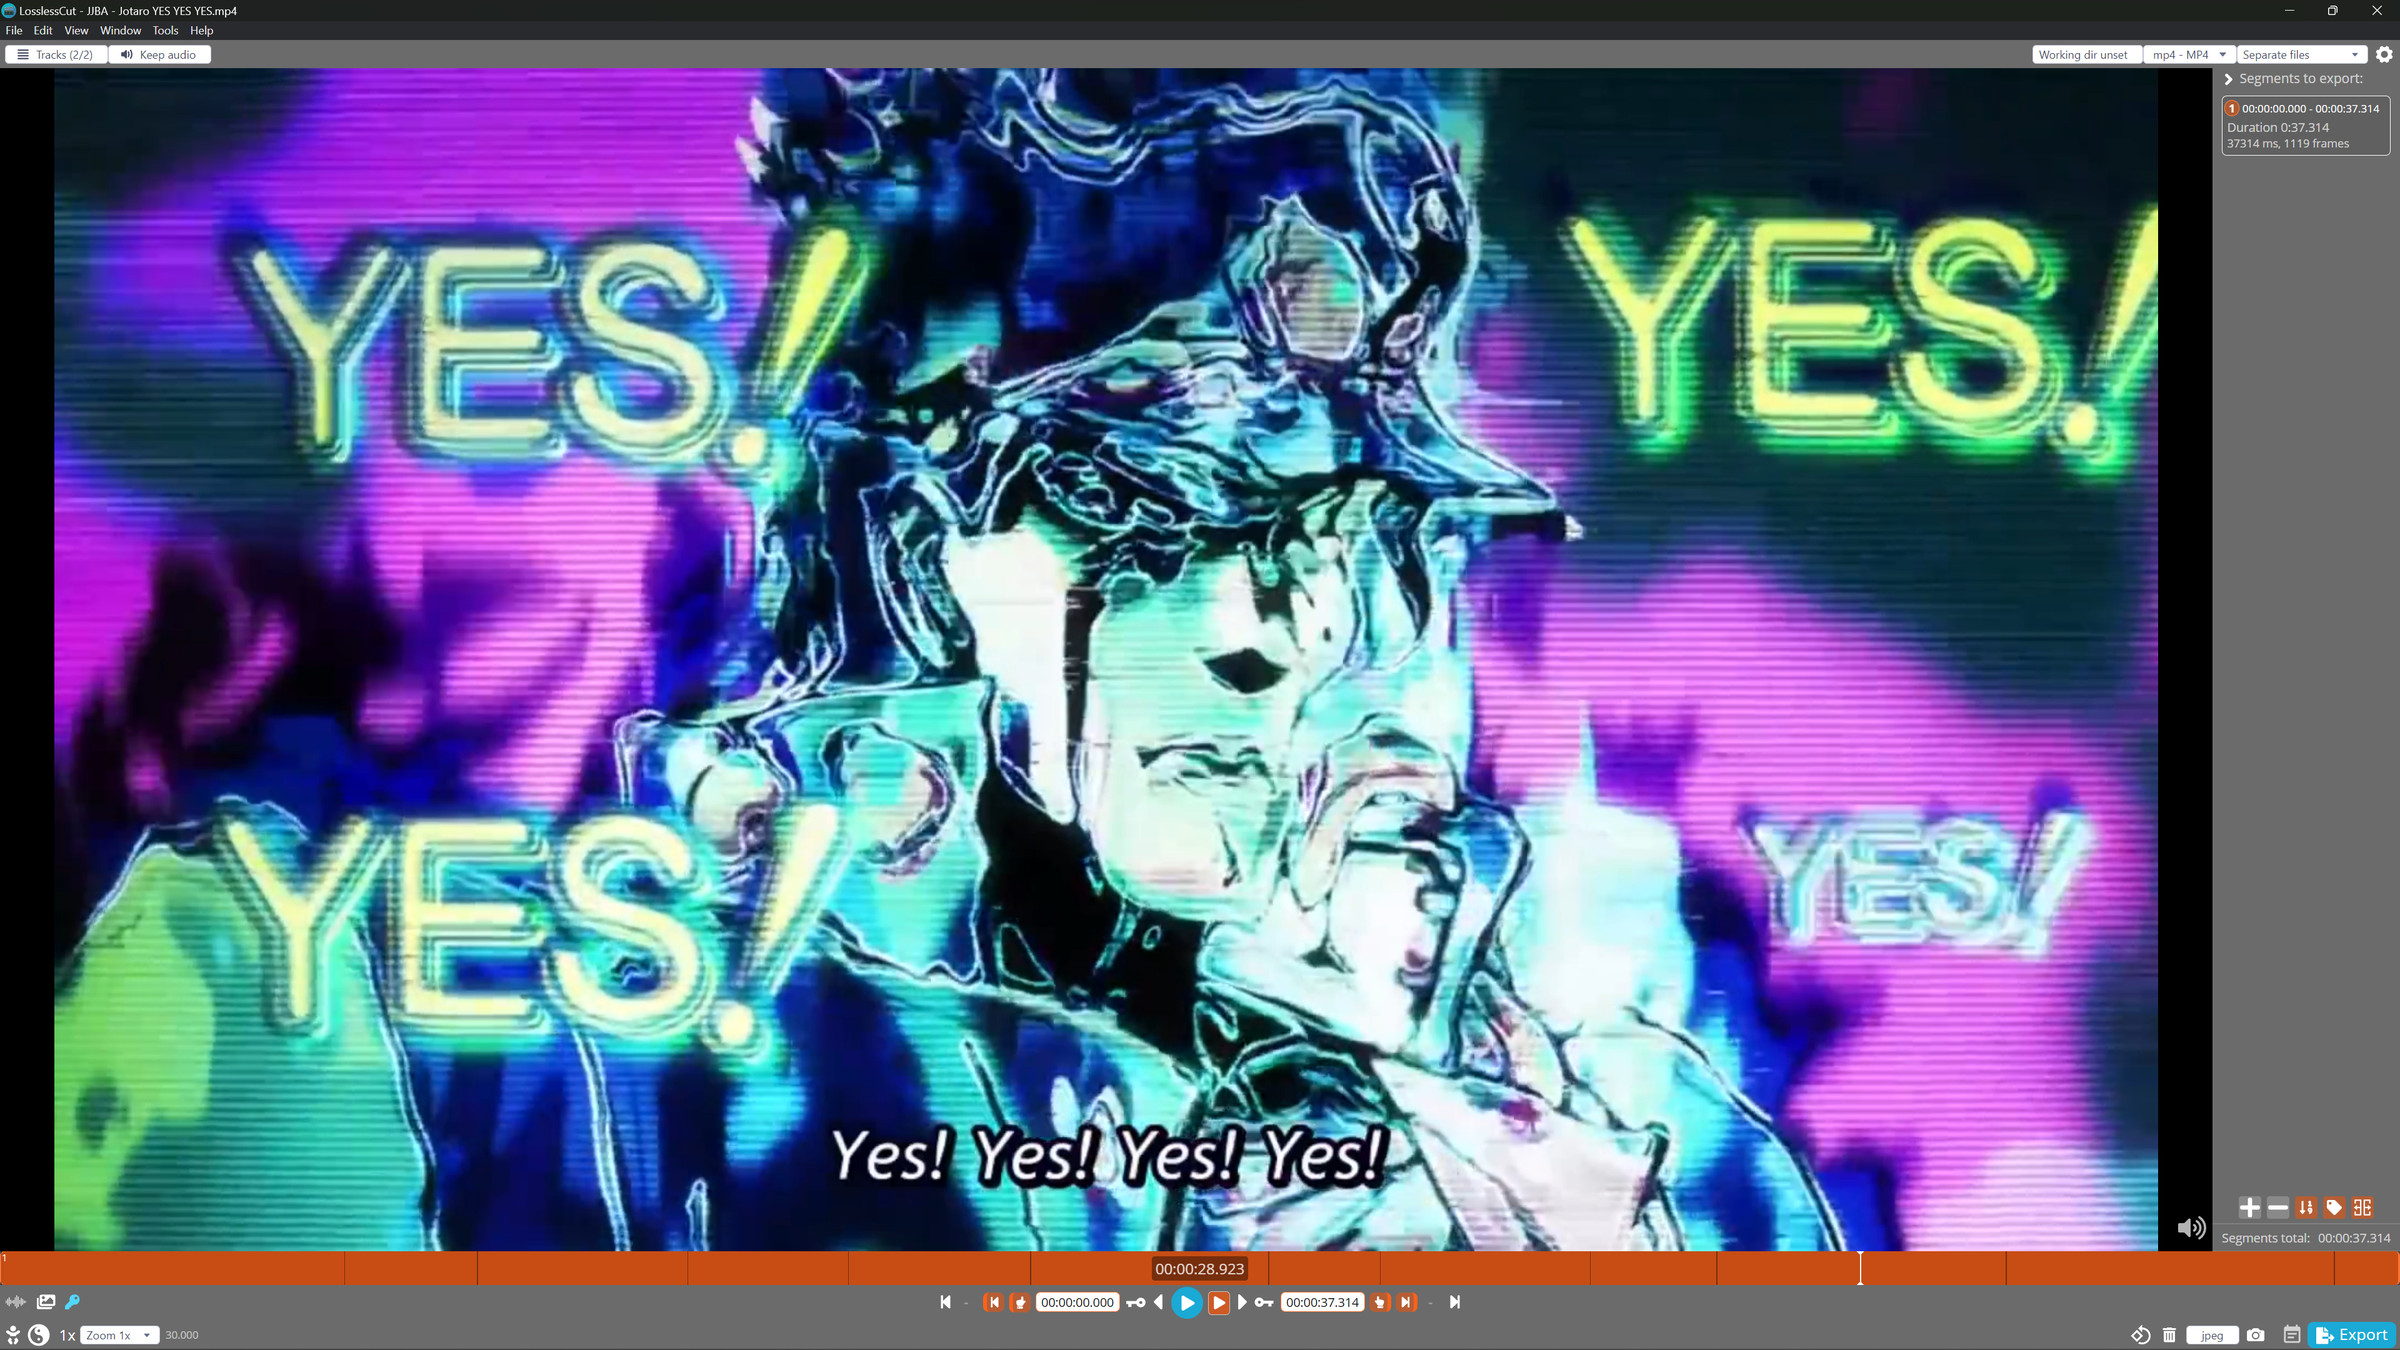 An image of a video from JoJo’s Bizzare Adventure downloaded from YouTube in Lossless Cut.